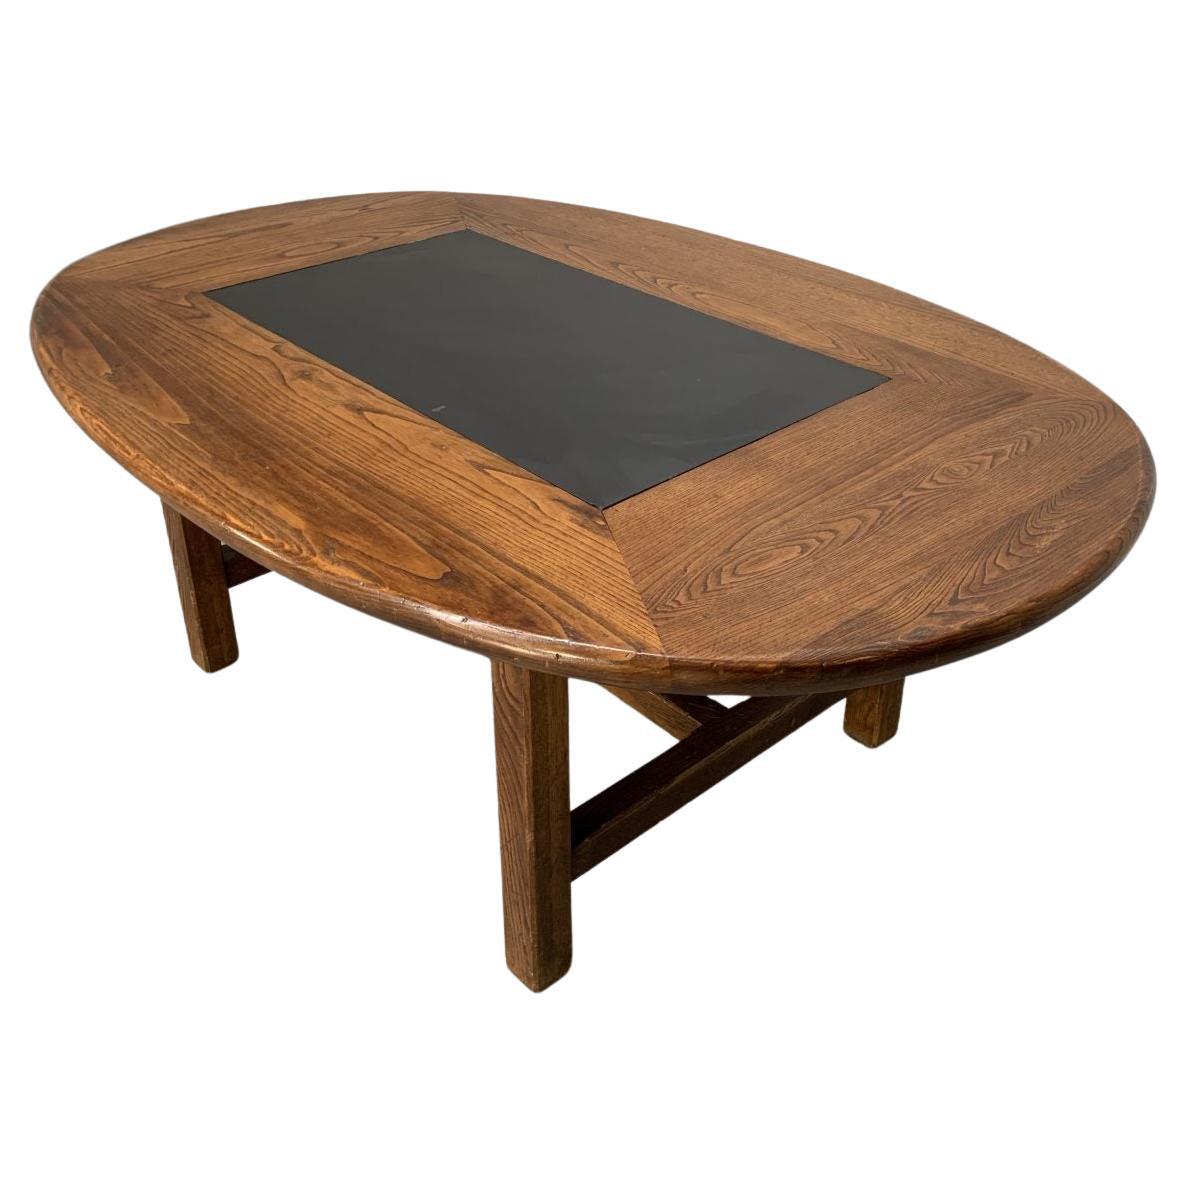 Superb William Yeoward Oval Dining Table in Chestnut and Slate For Sale